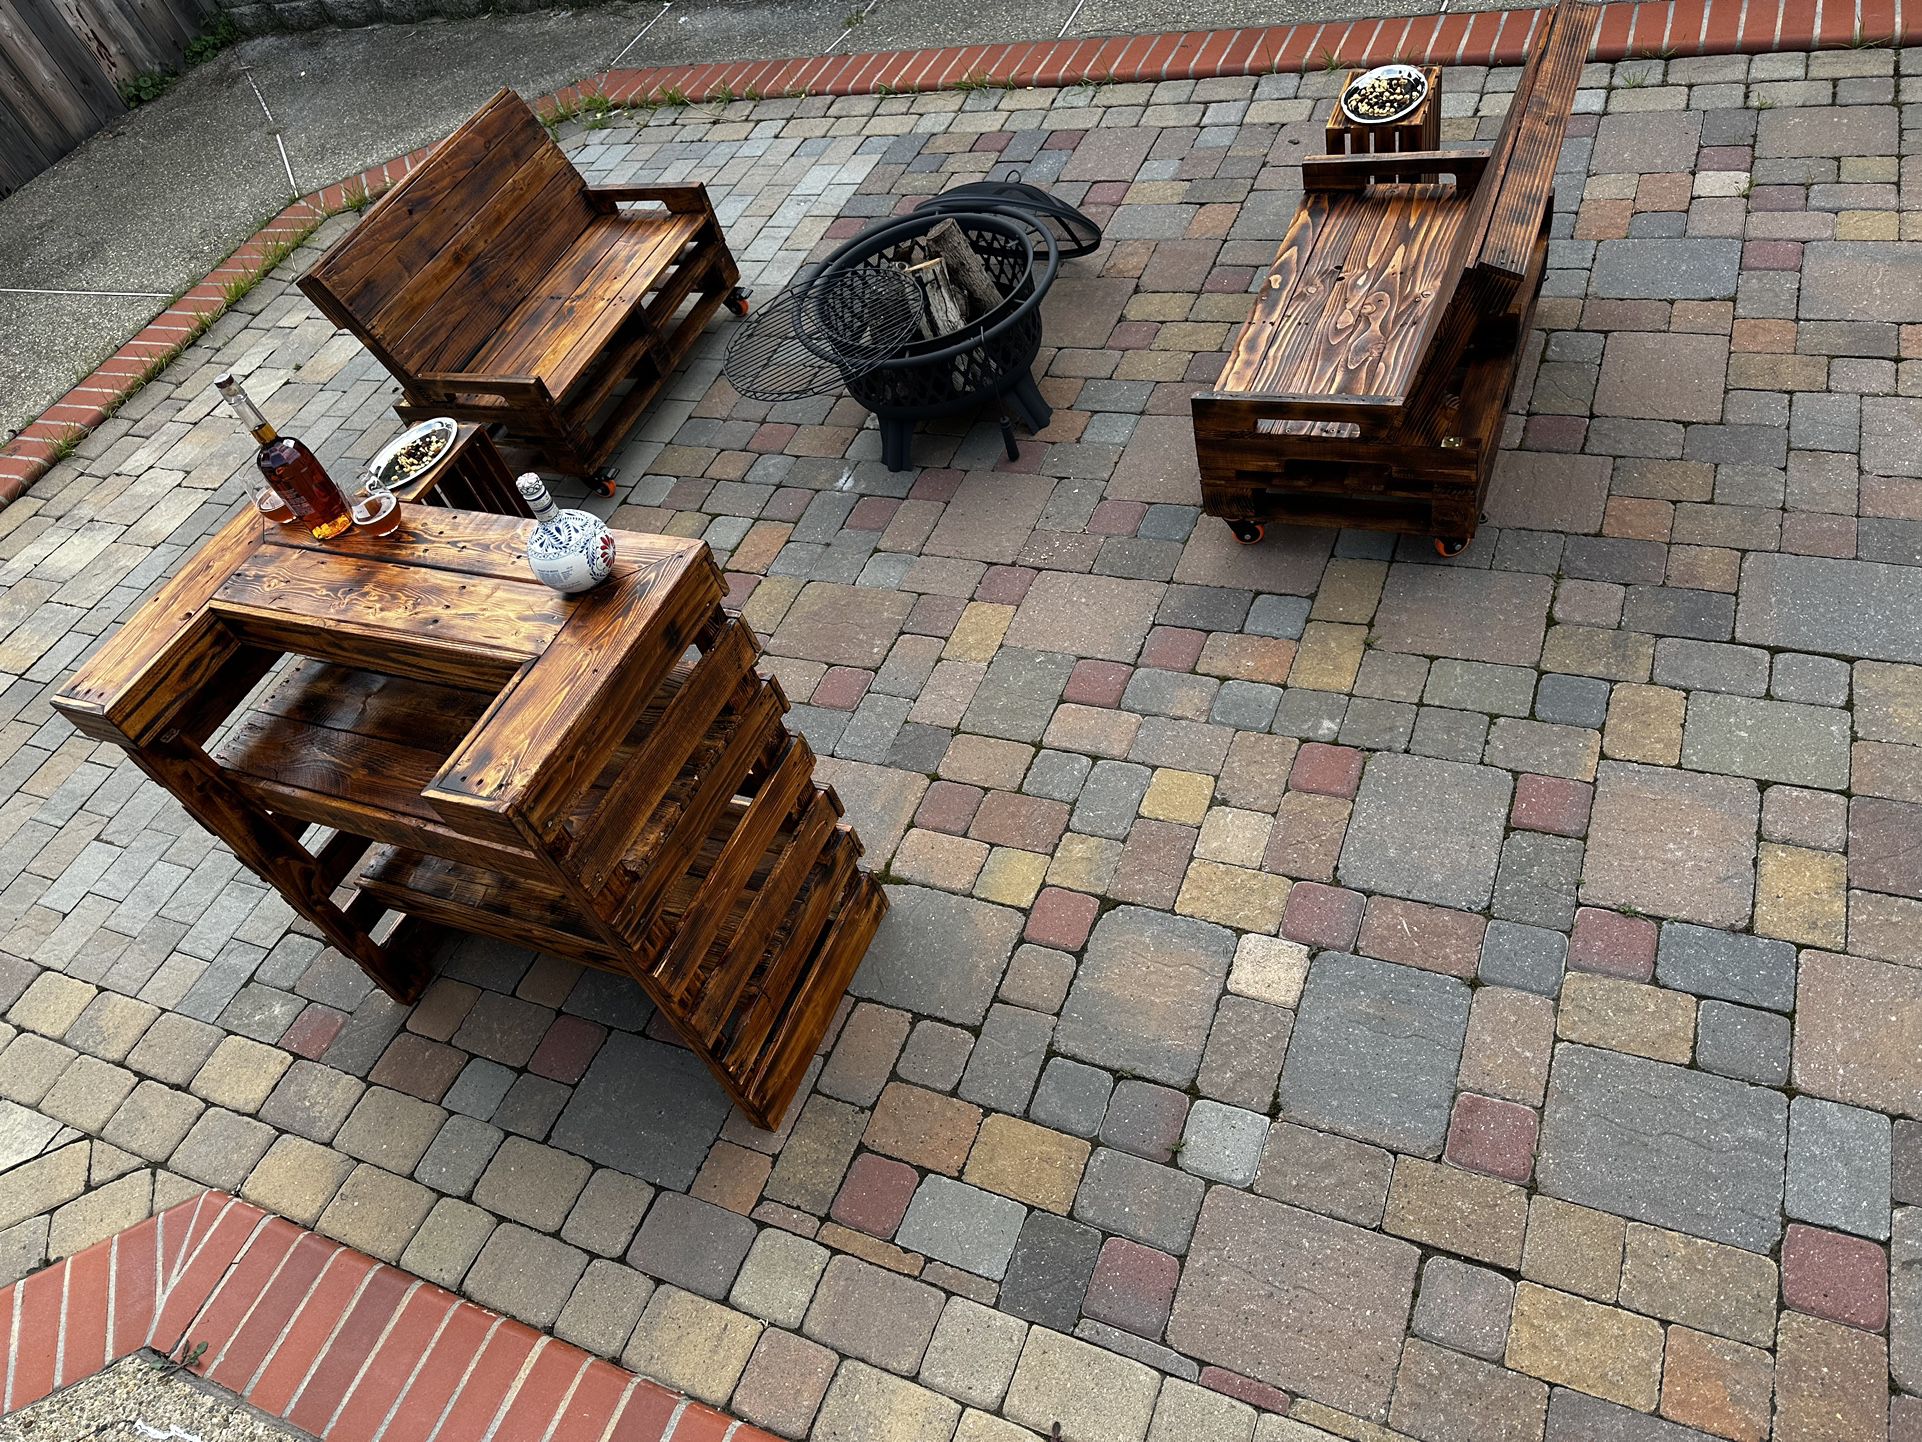 Rustic Patio Furniture Made From Wooden Pallets 